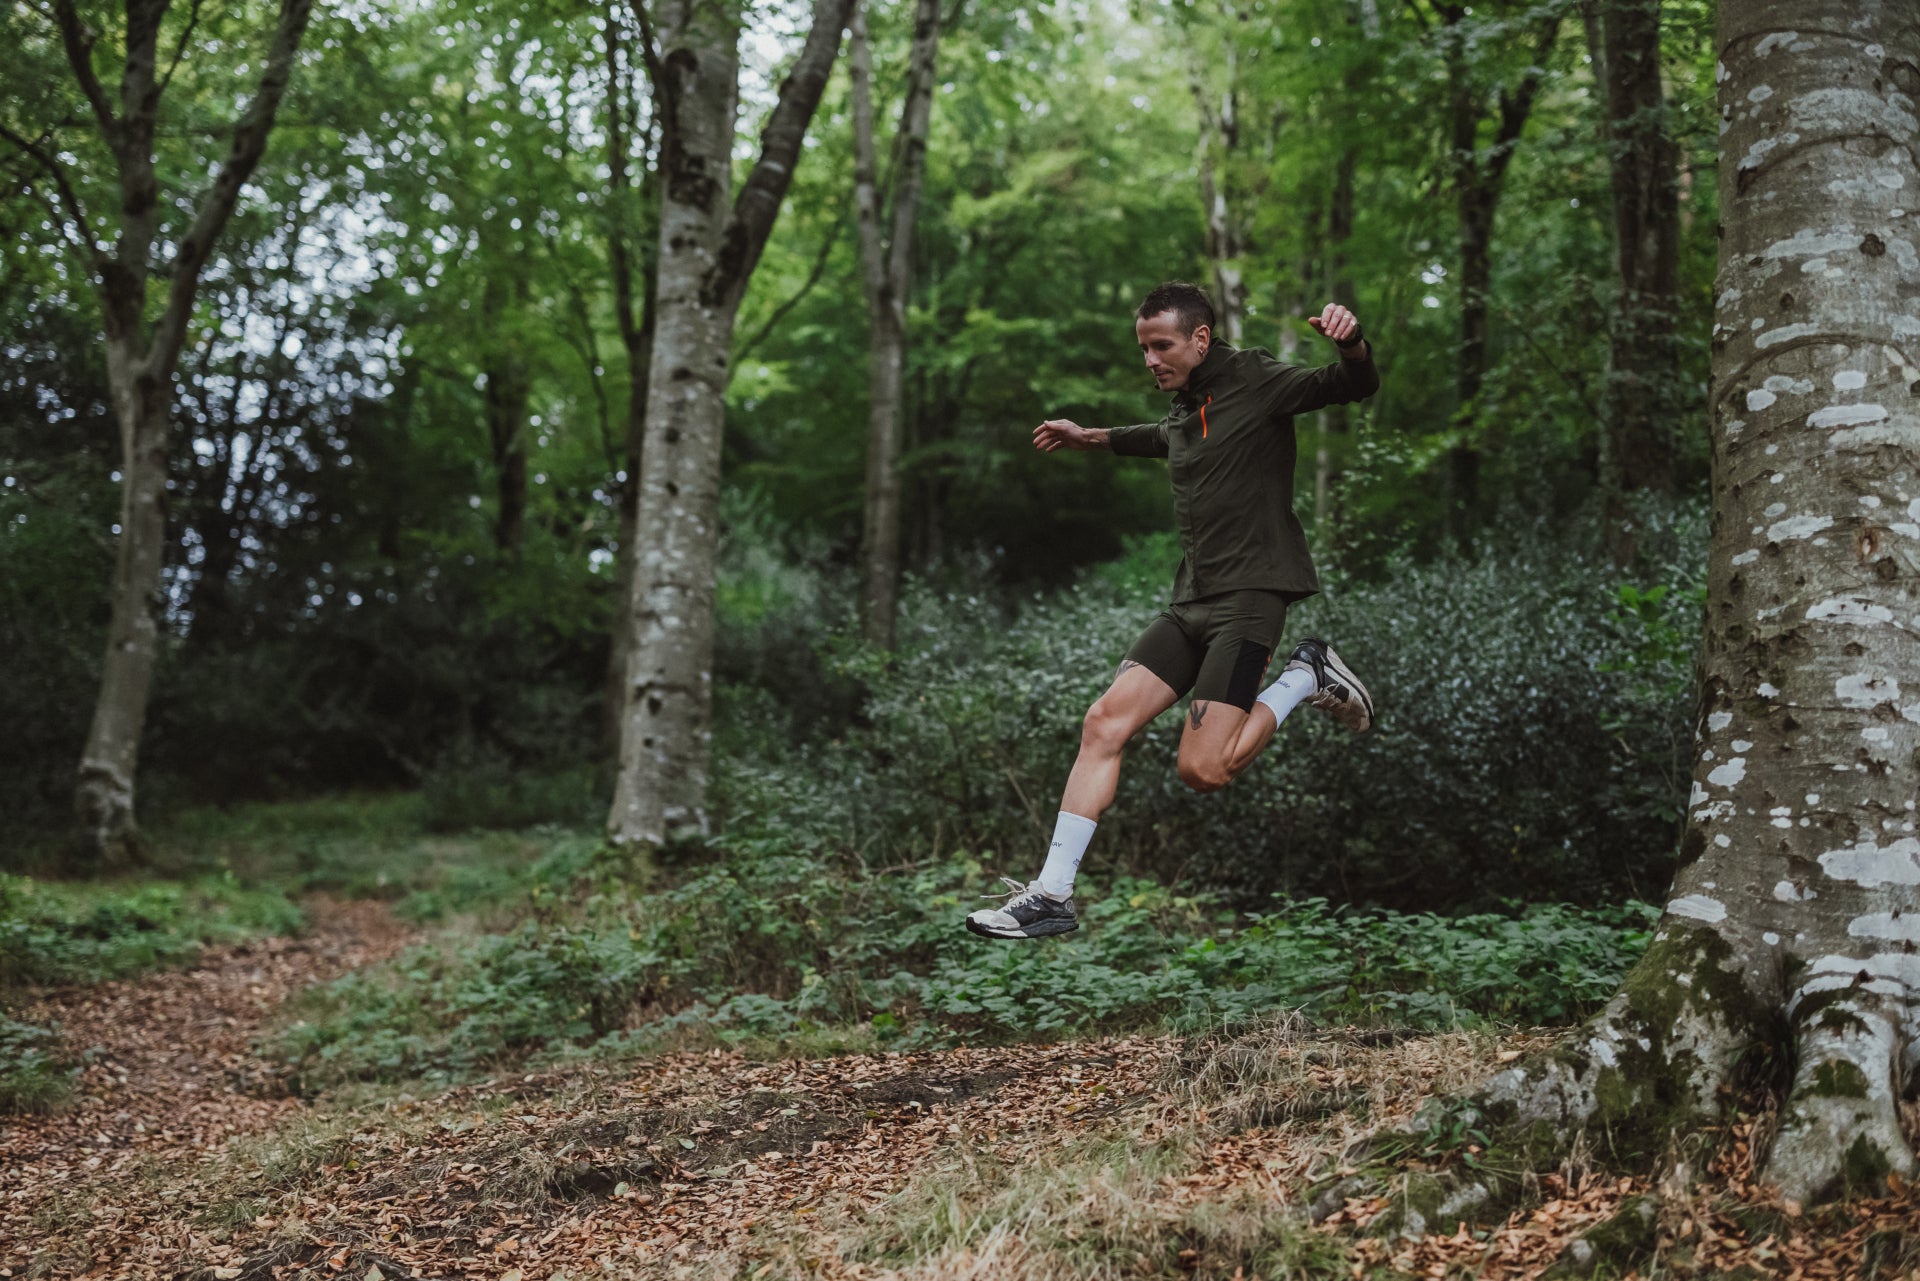 Rockay | High Performance Running Gear and Running Clothes